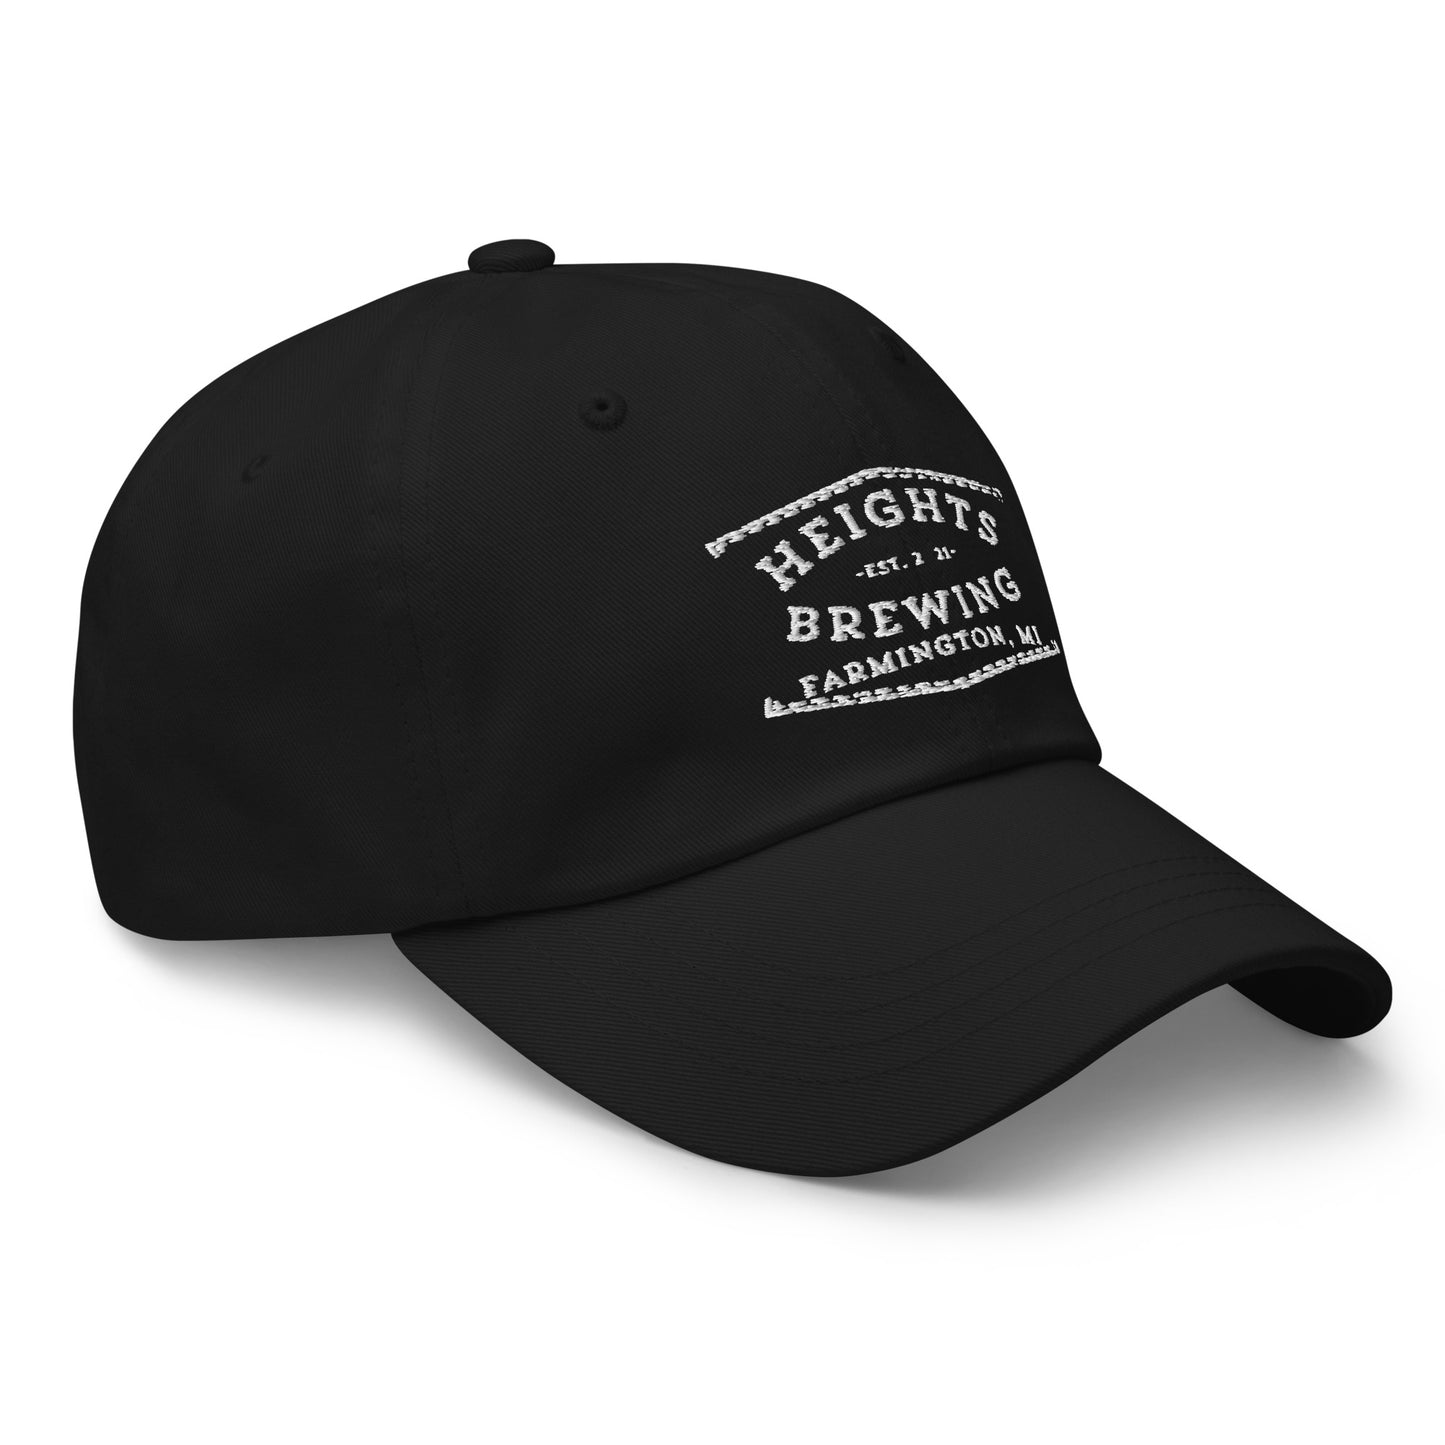 Heights Brewing Hat